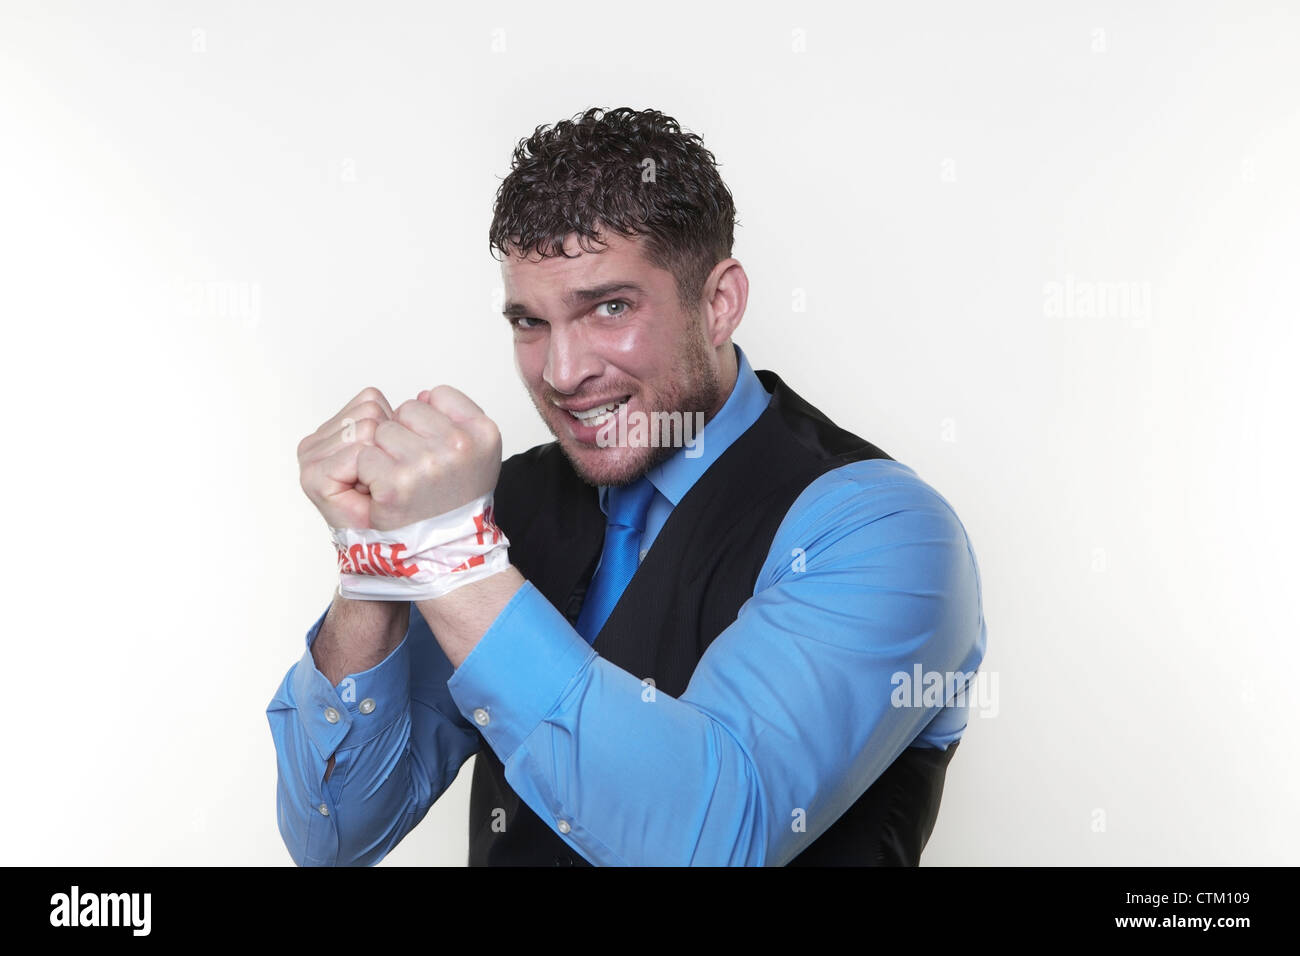 handsome man with his wrist taped up with fragile tape so he cant do any work and in need od some help Stock Photo